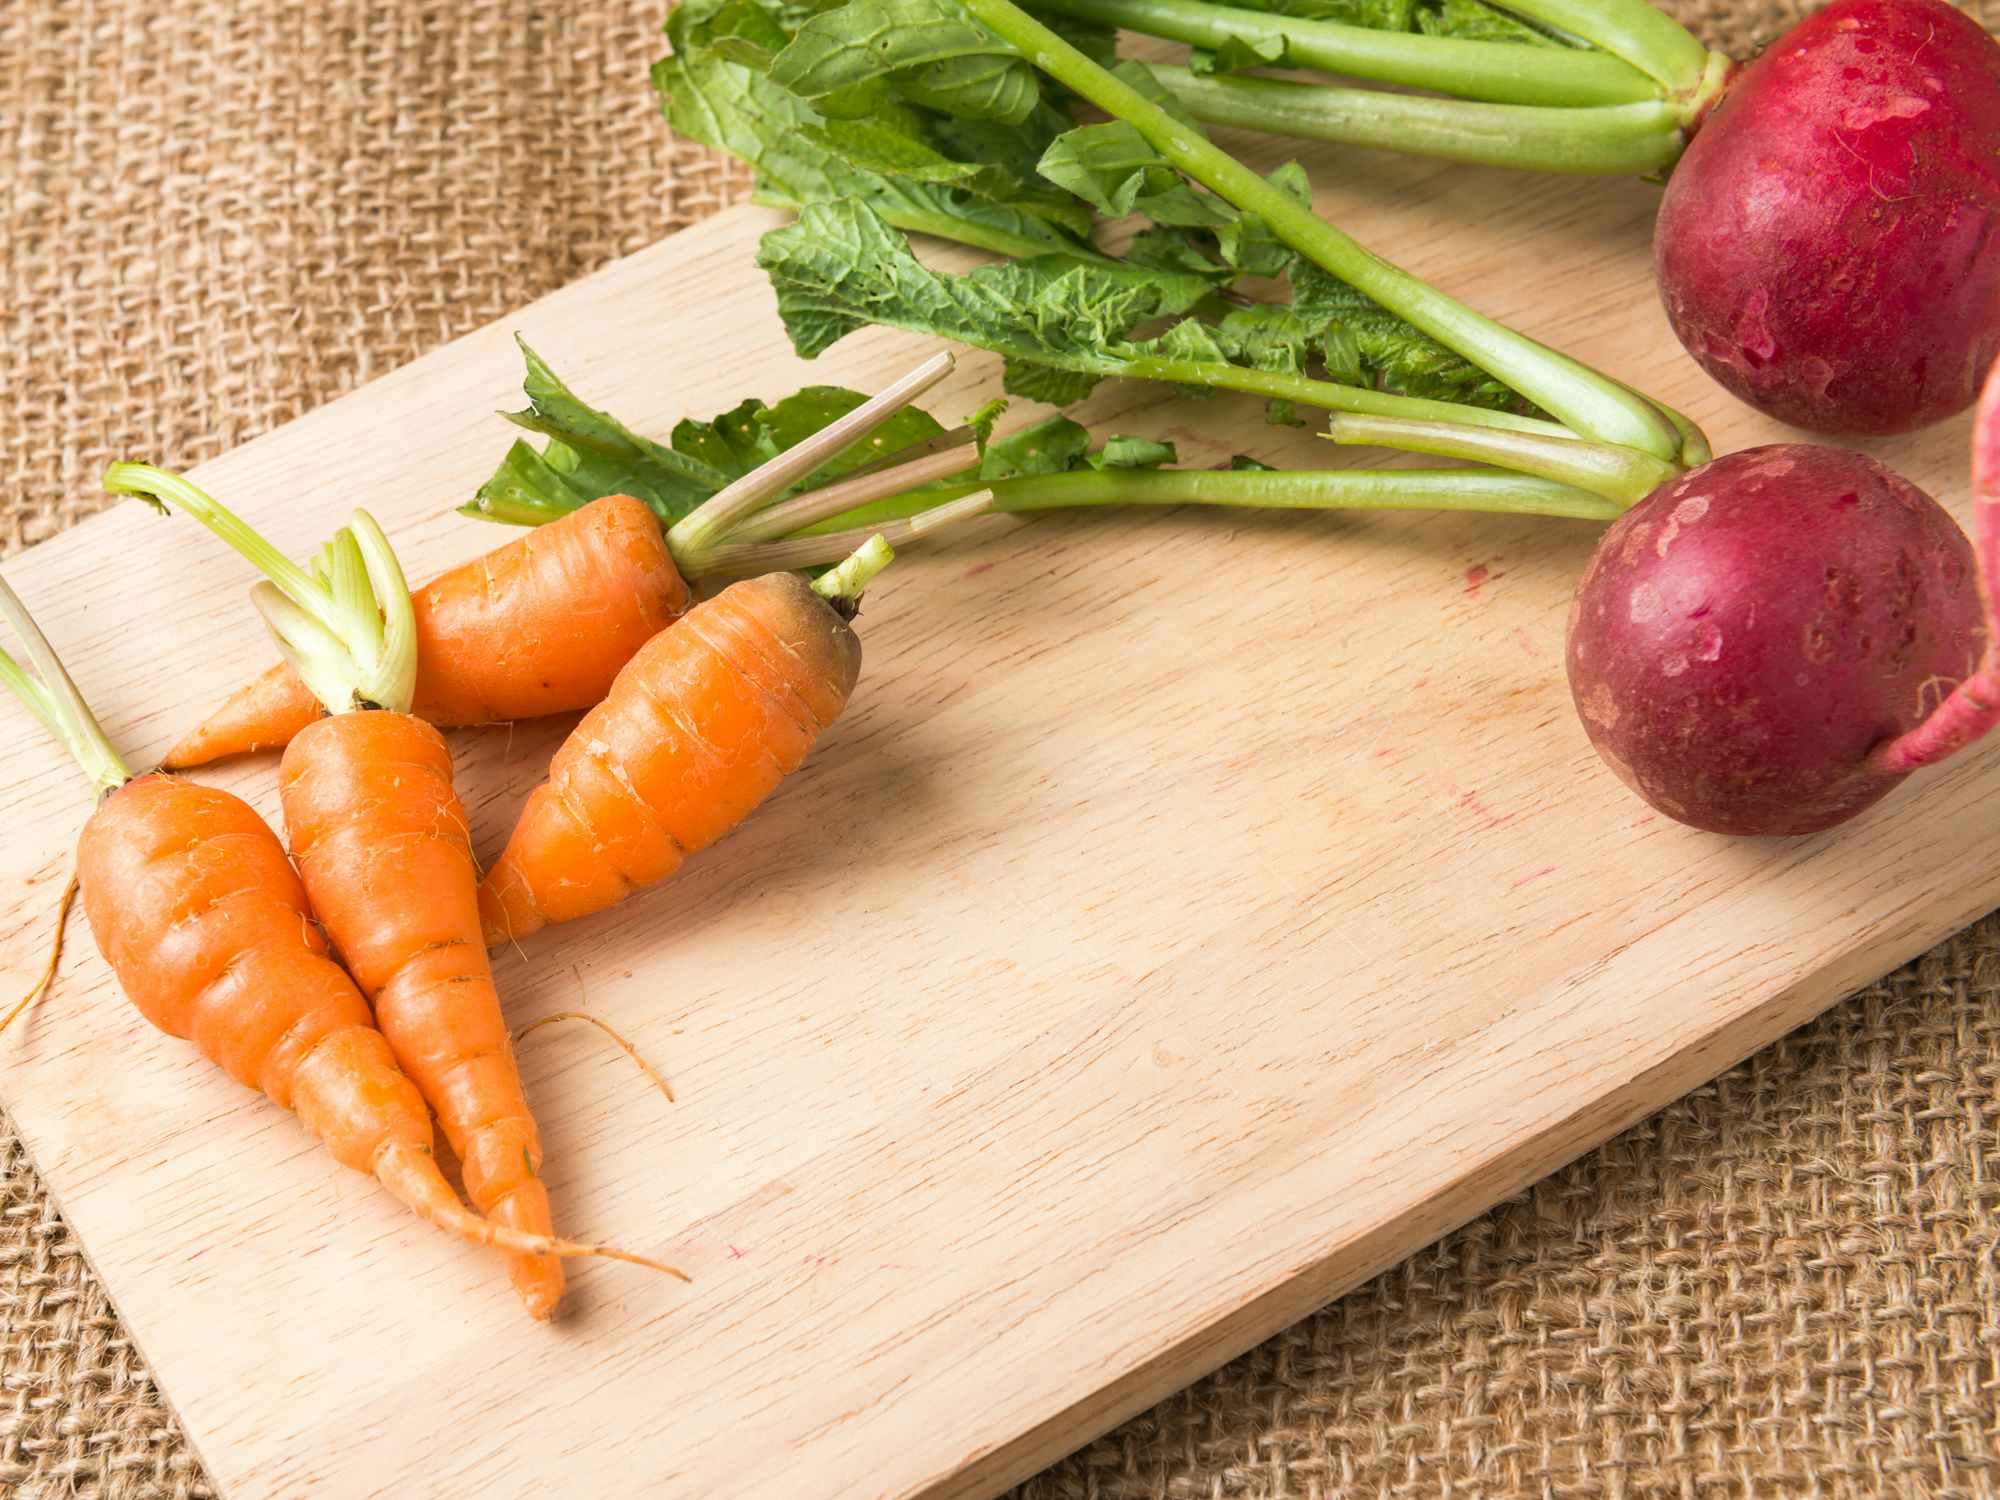 carrots and radish on a cutting board